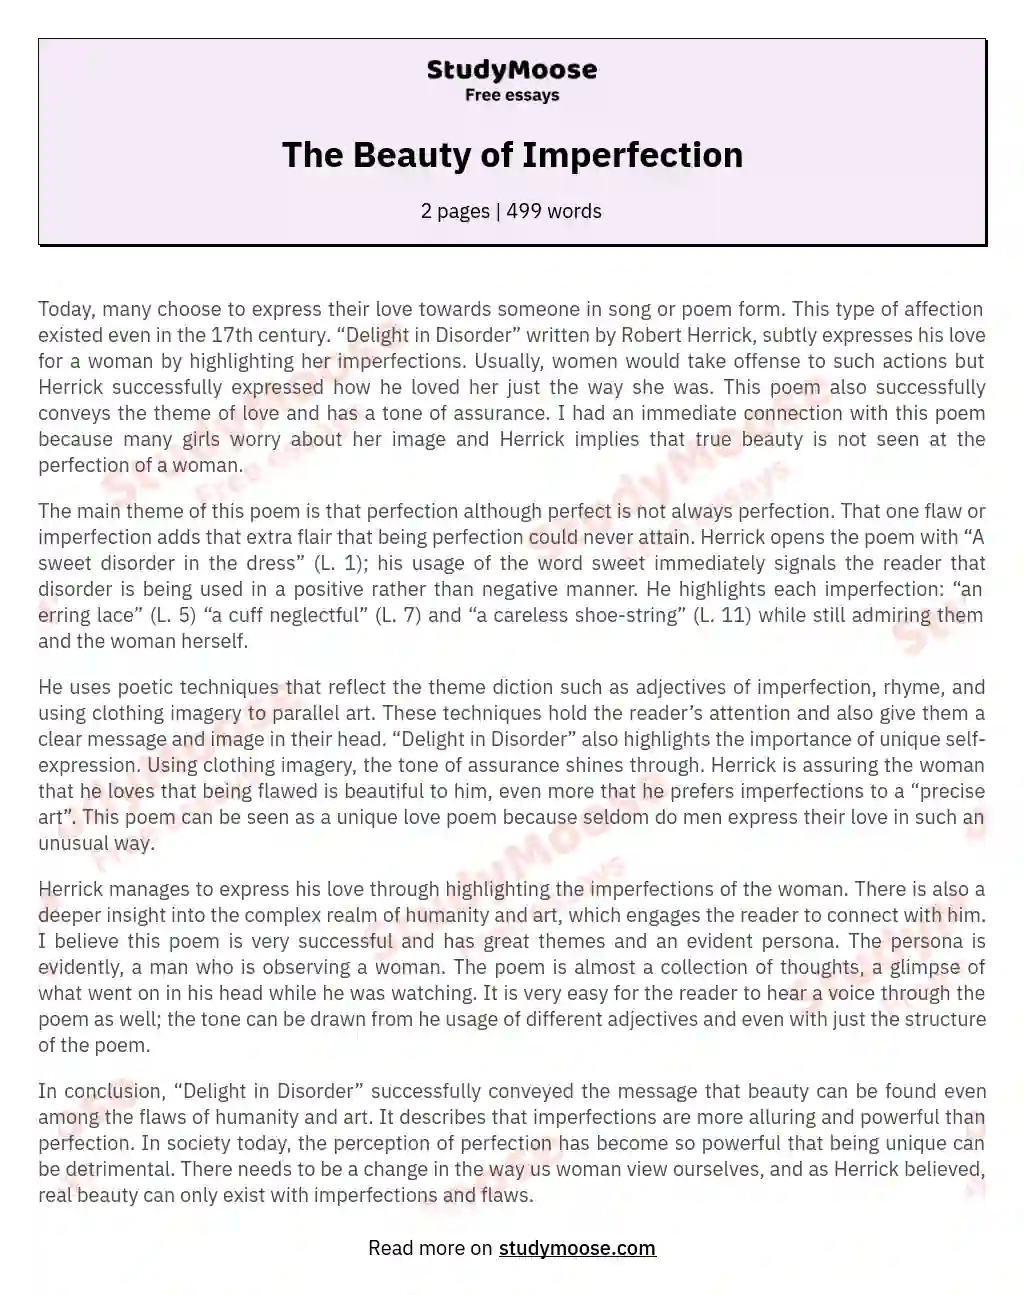 The Beauty of Imperfection essay